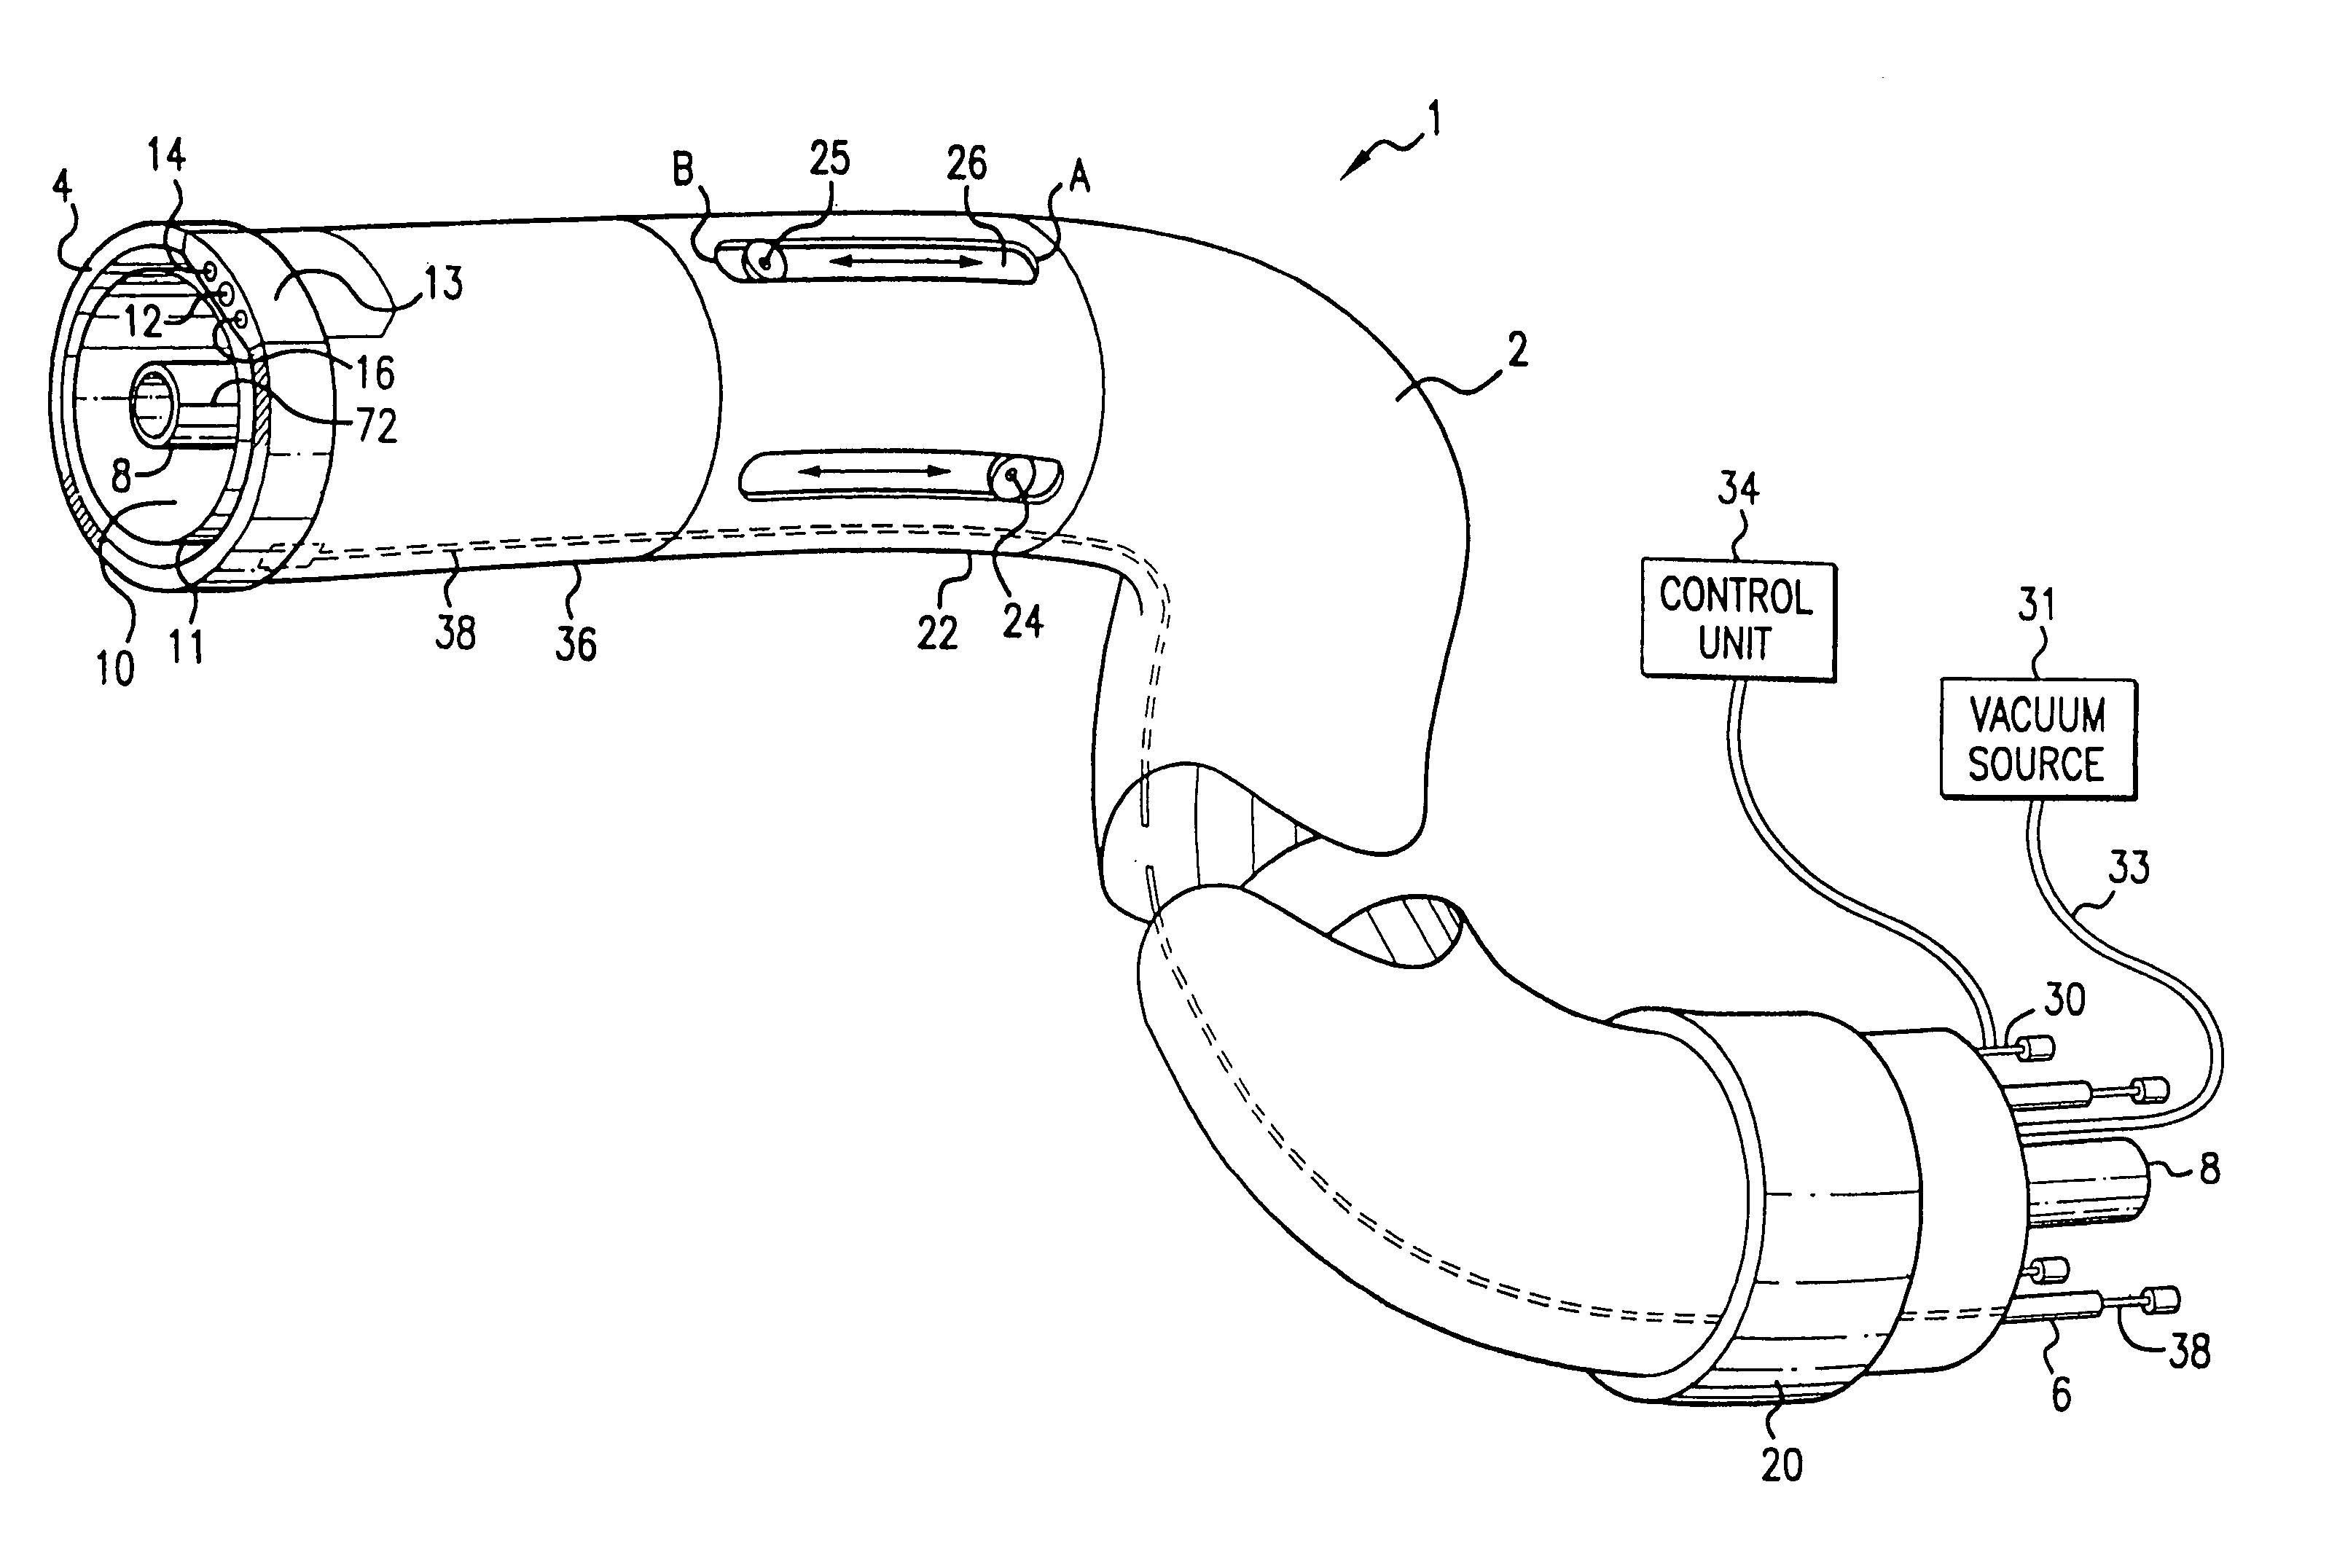 Catheter introducer system for exploration of body cavities